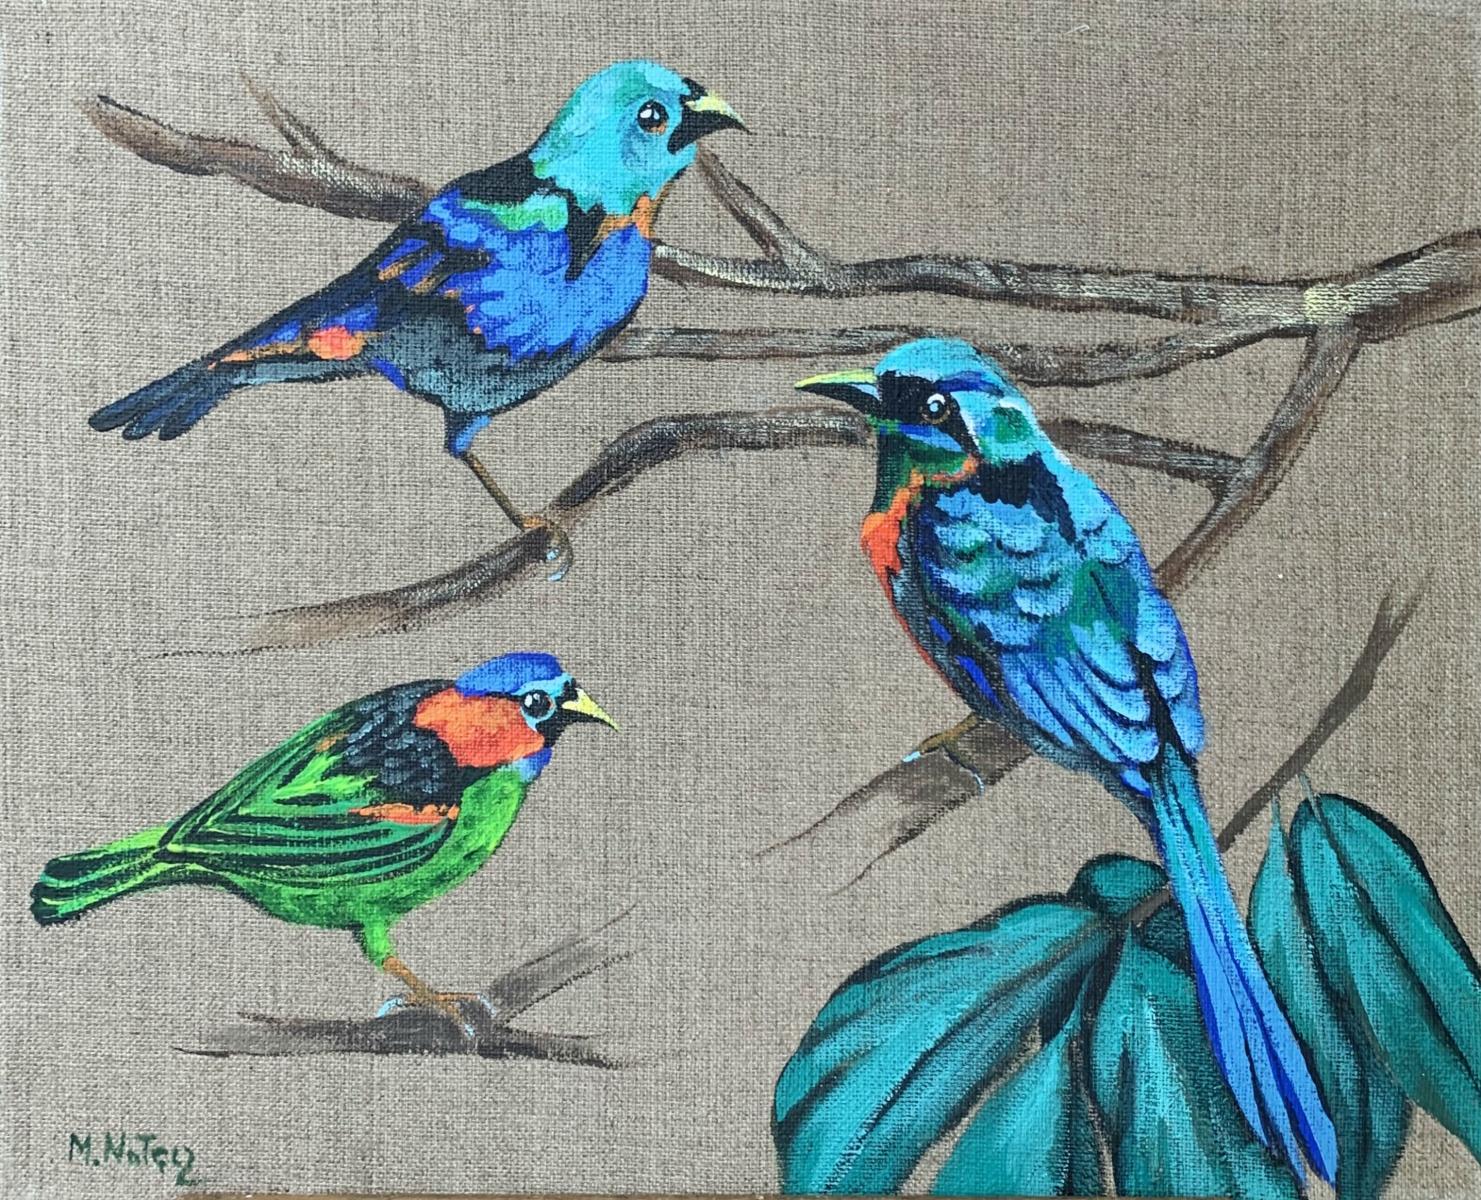 Magdalena Nałęcz Figurative Painting - Gardens of delight 12 - Figurative painting, Birds, Realistic, Vibrant colors